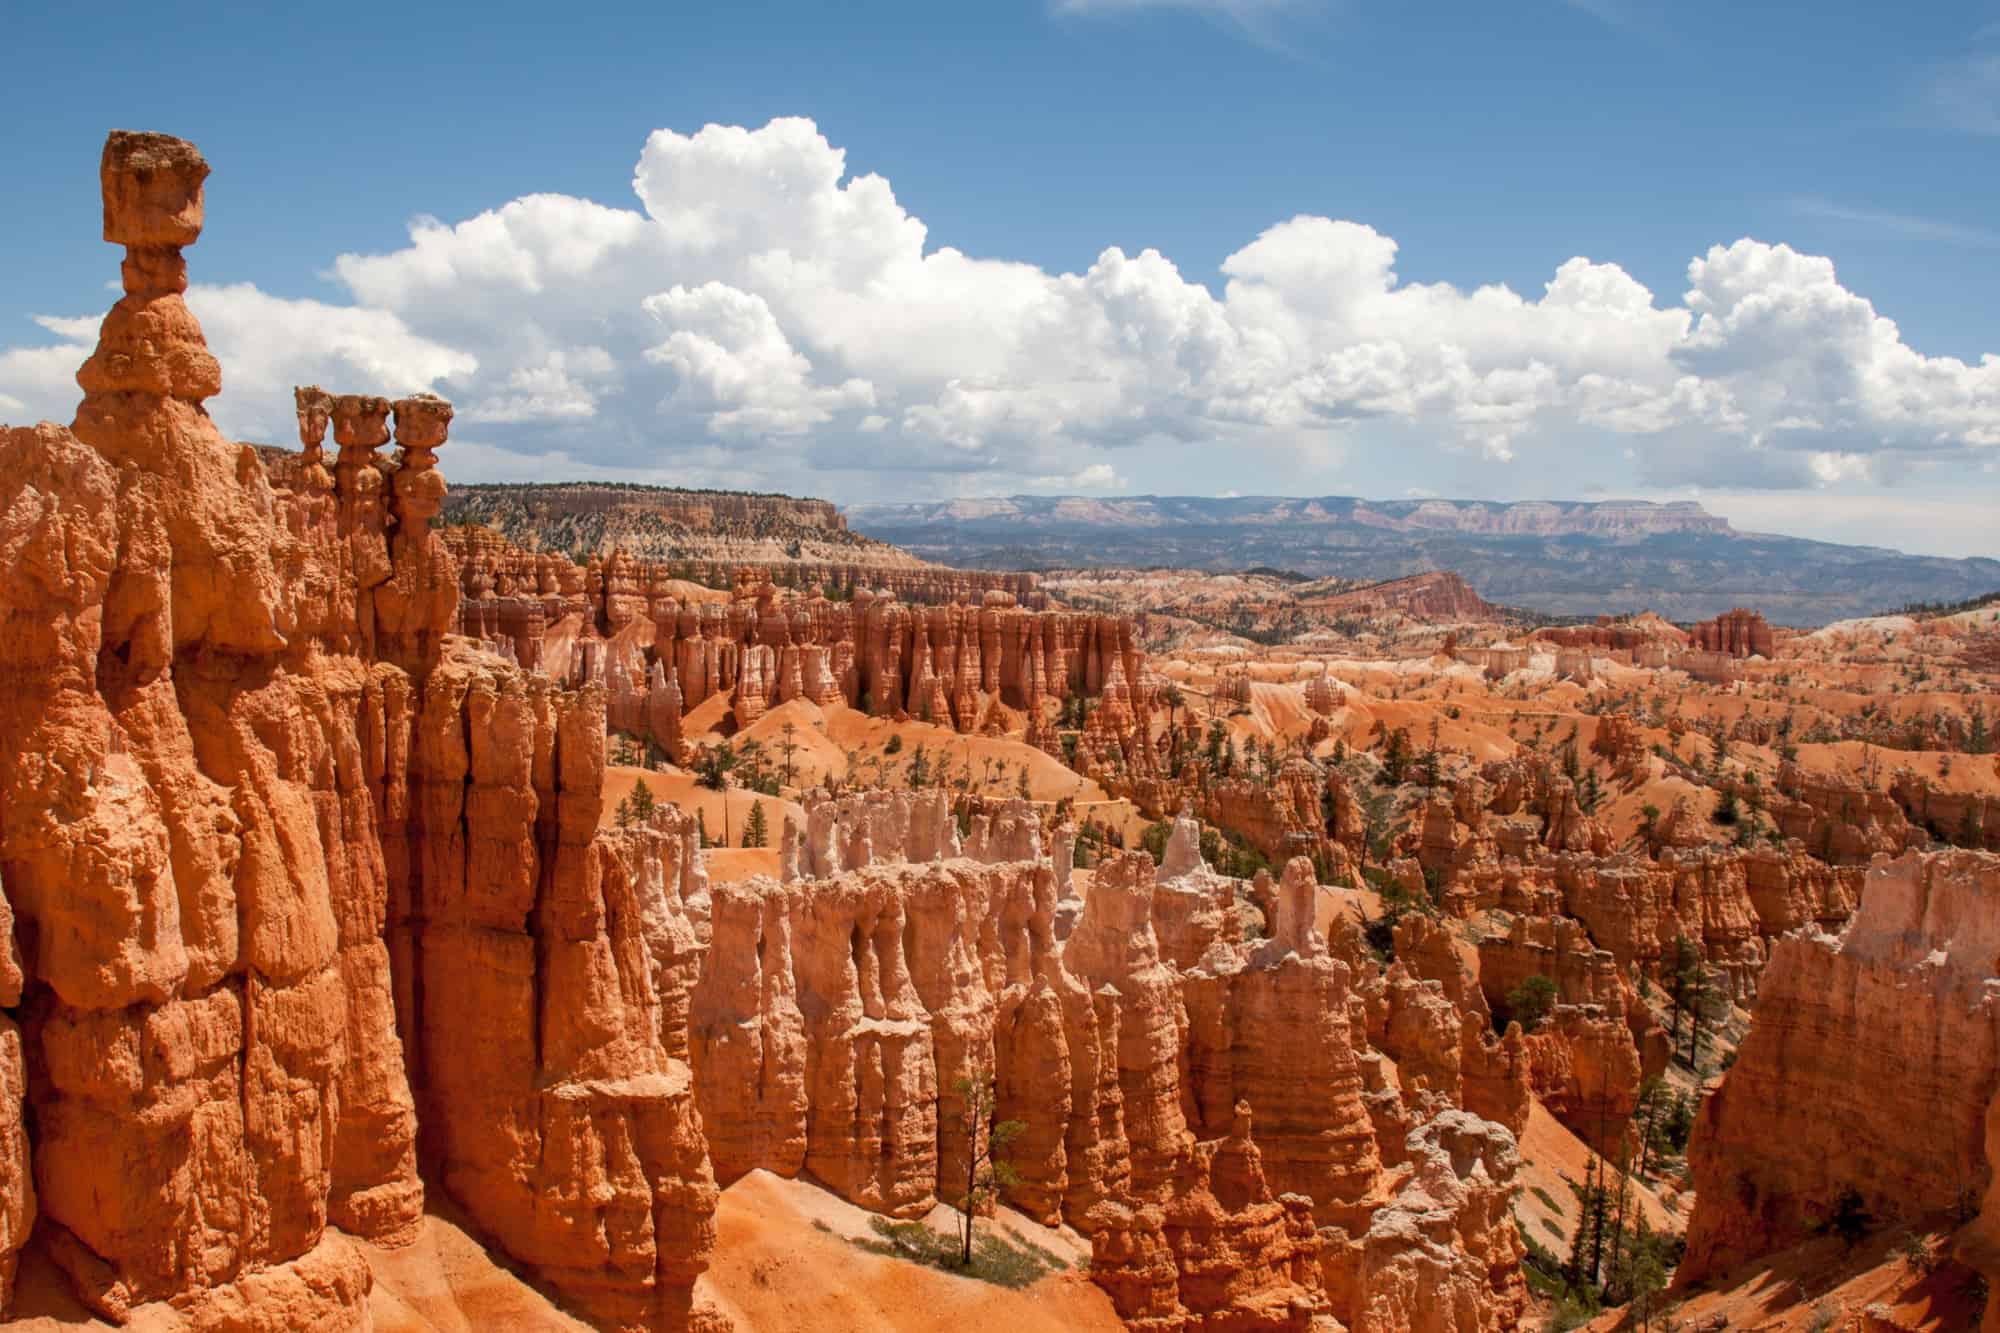 hoodoos including thor's hammer can be seen at bryce canyon national park, one of the 5 national parks near st. george, utah